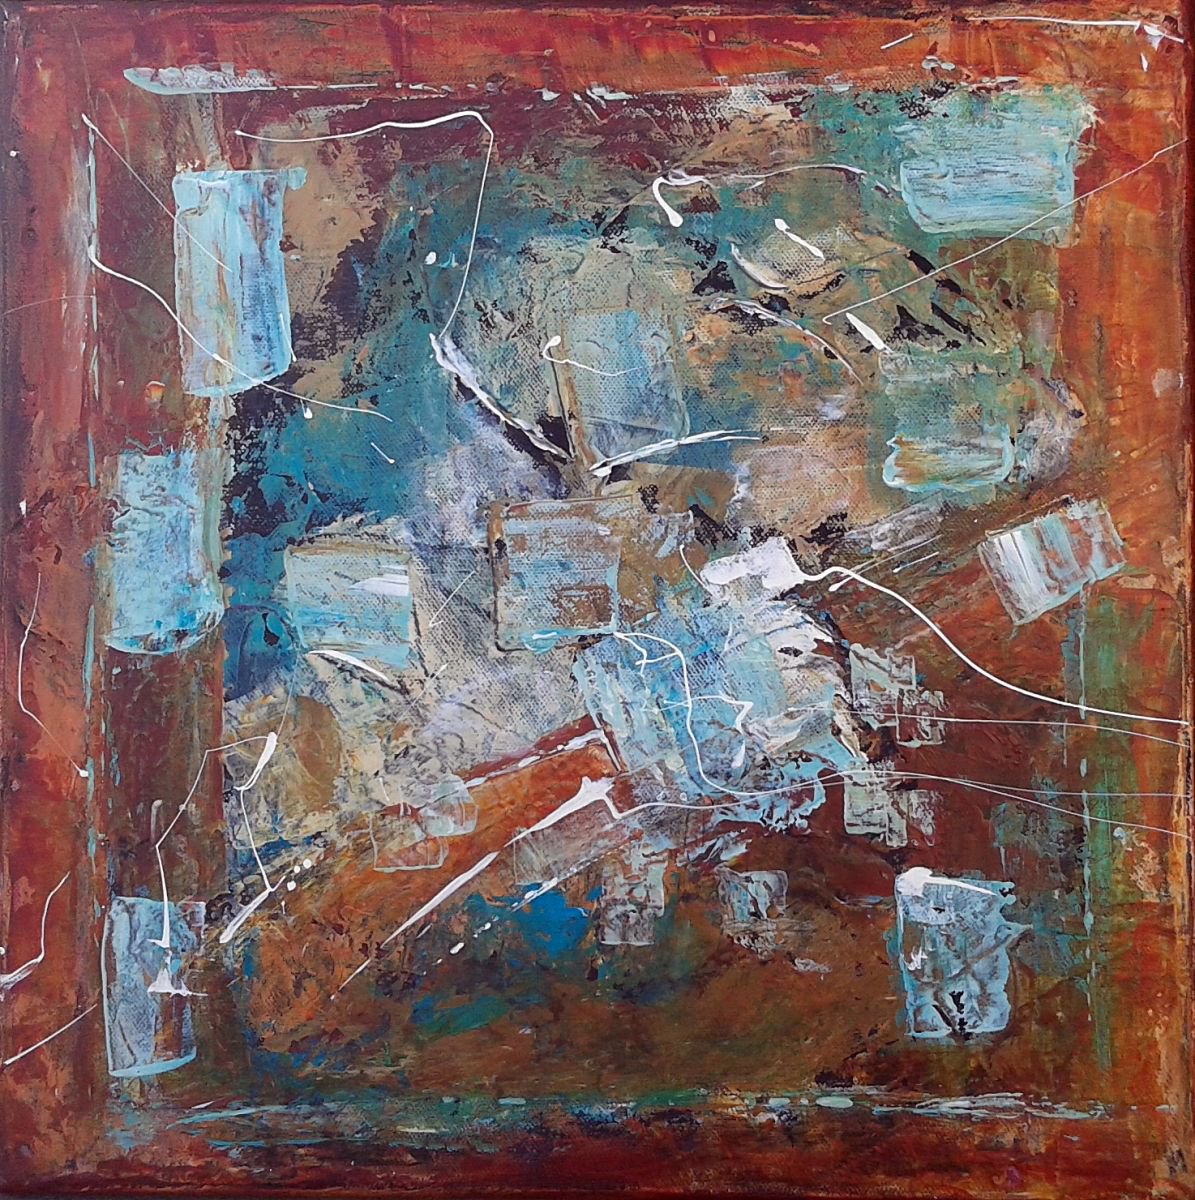 TURQUOISE DREAM, abstract turquoise copper painting by Emilia Milcheva